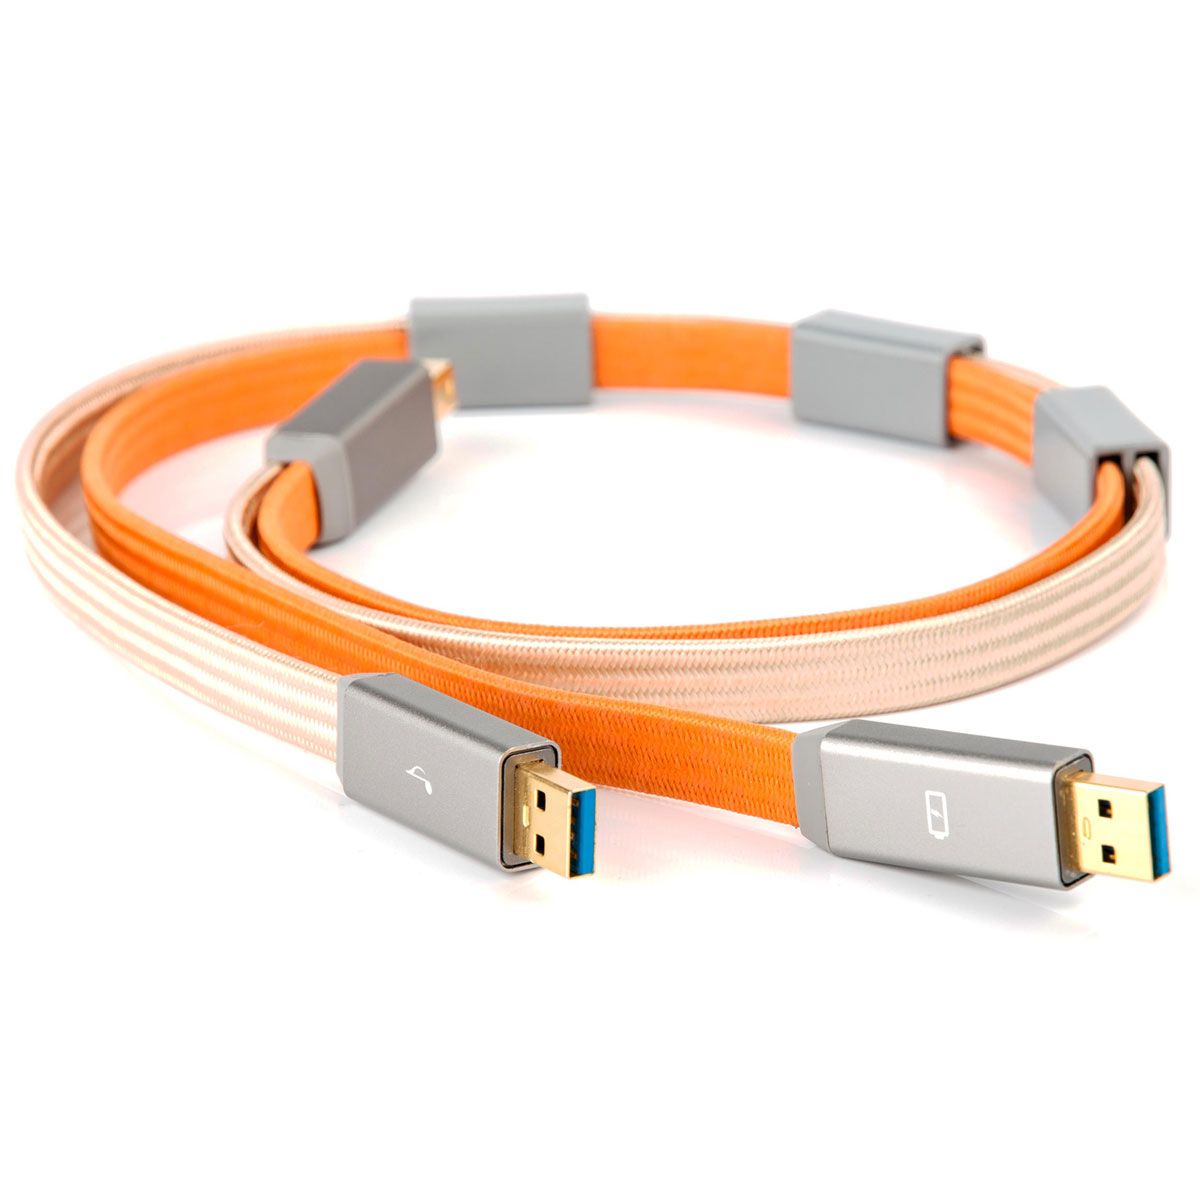 Gemini3.0 Dual Headed Audiophile USB 3.0 Cable - full cable view